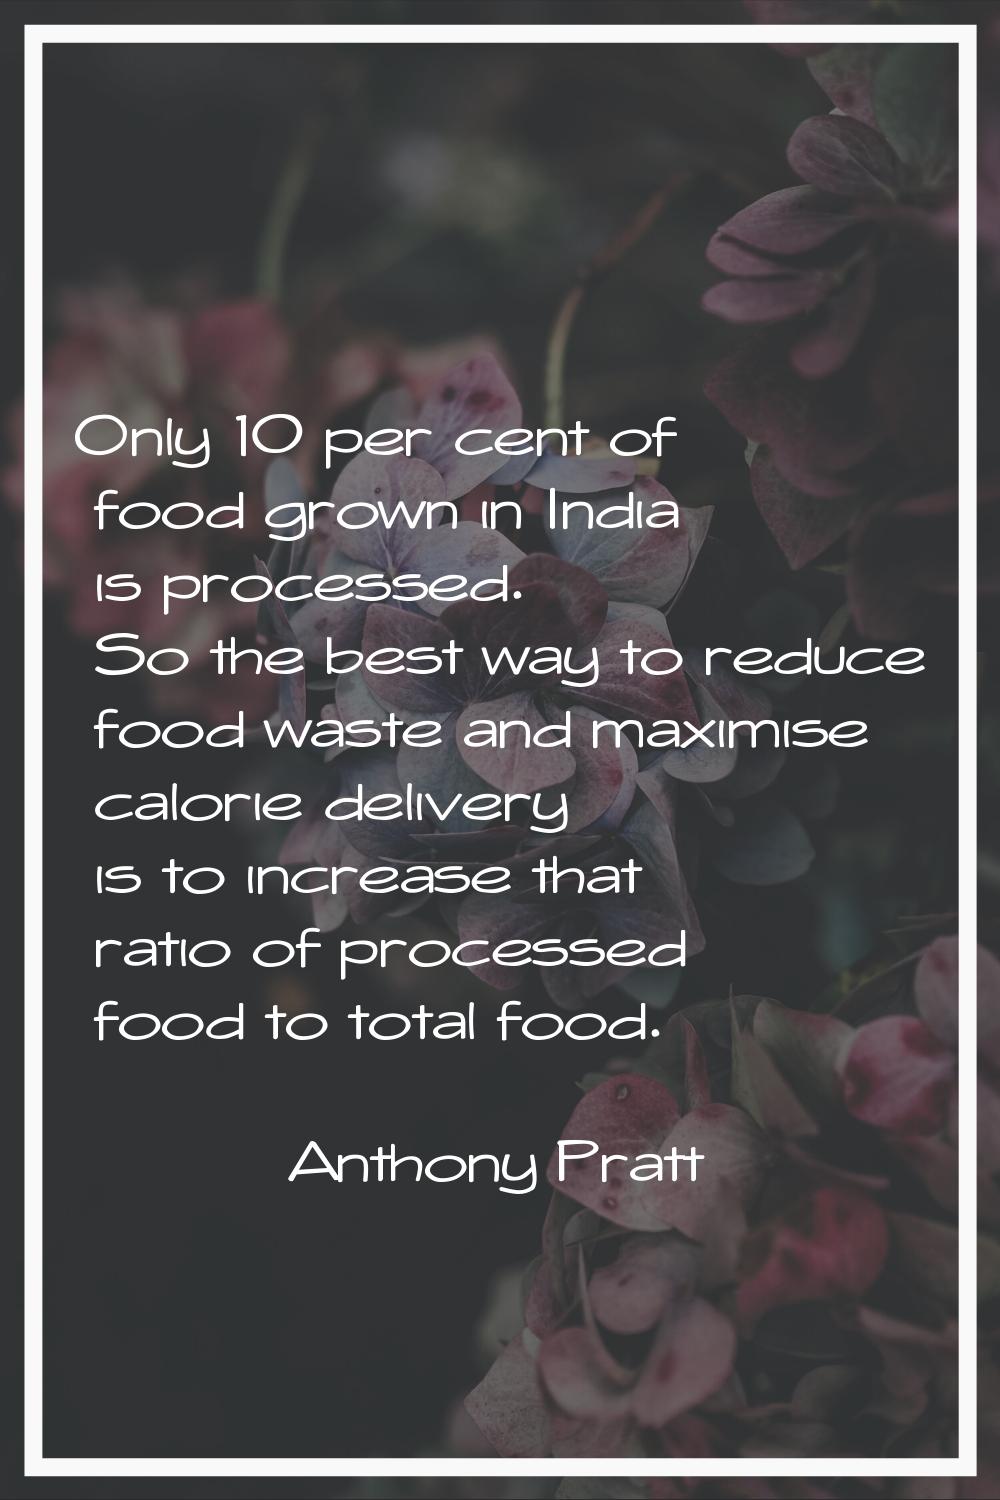 Only 10 per cent of food grown in India is processed. So the best way to reduce food waste and maxi